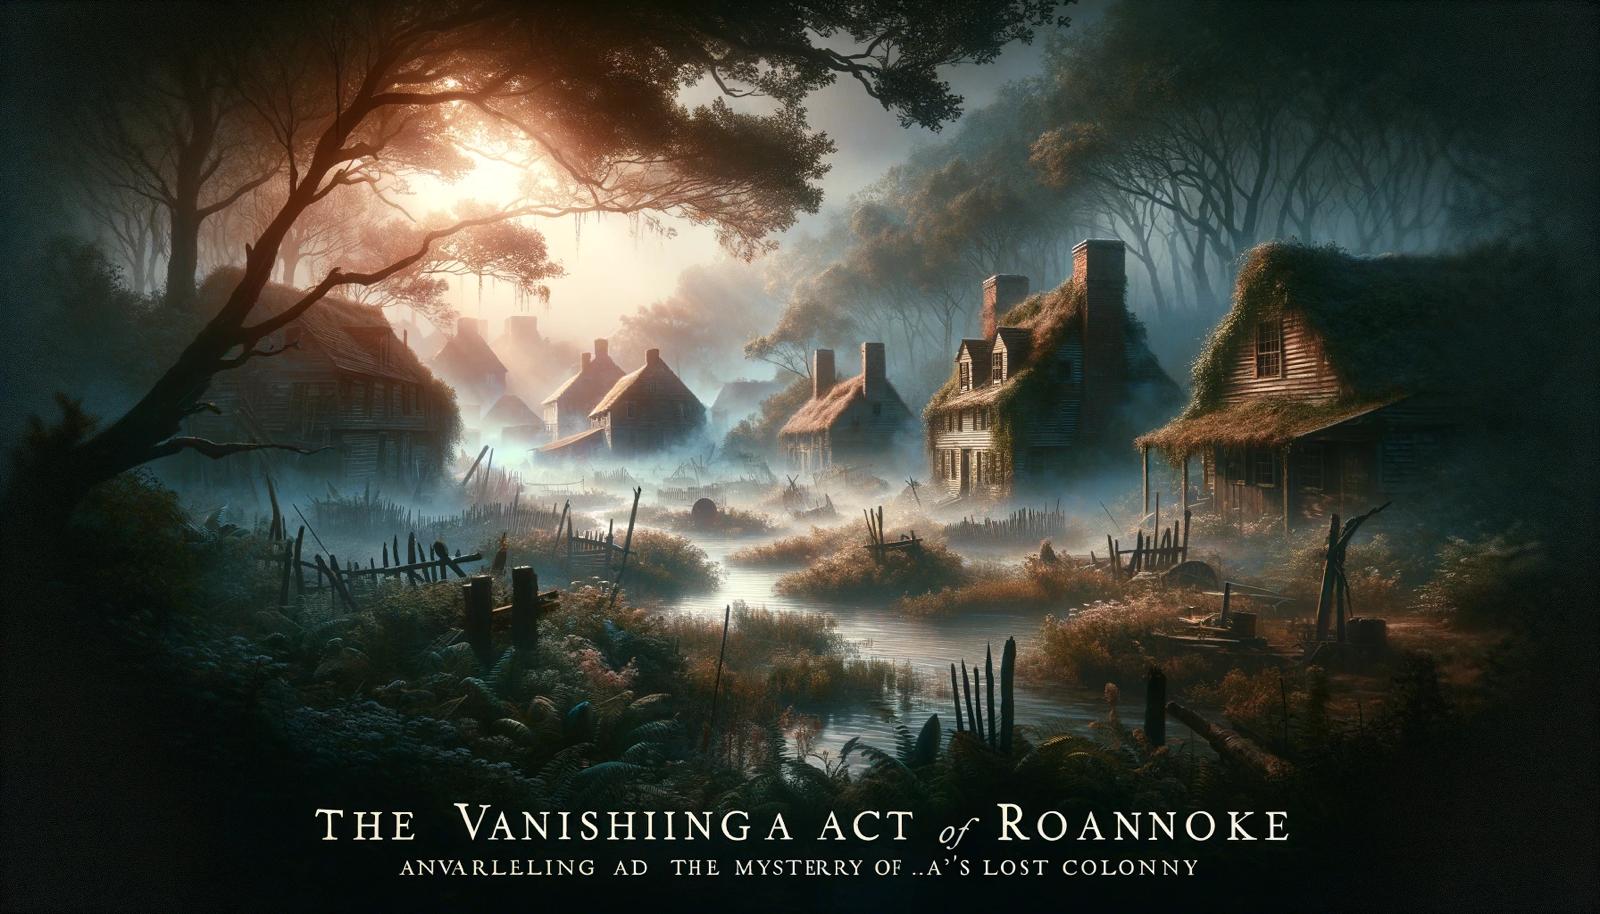 The Vanishing Act of Roanoke: Unraveling the Mystery of America’s Lost Colony